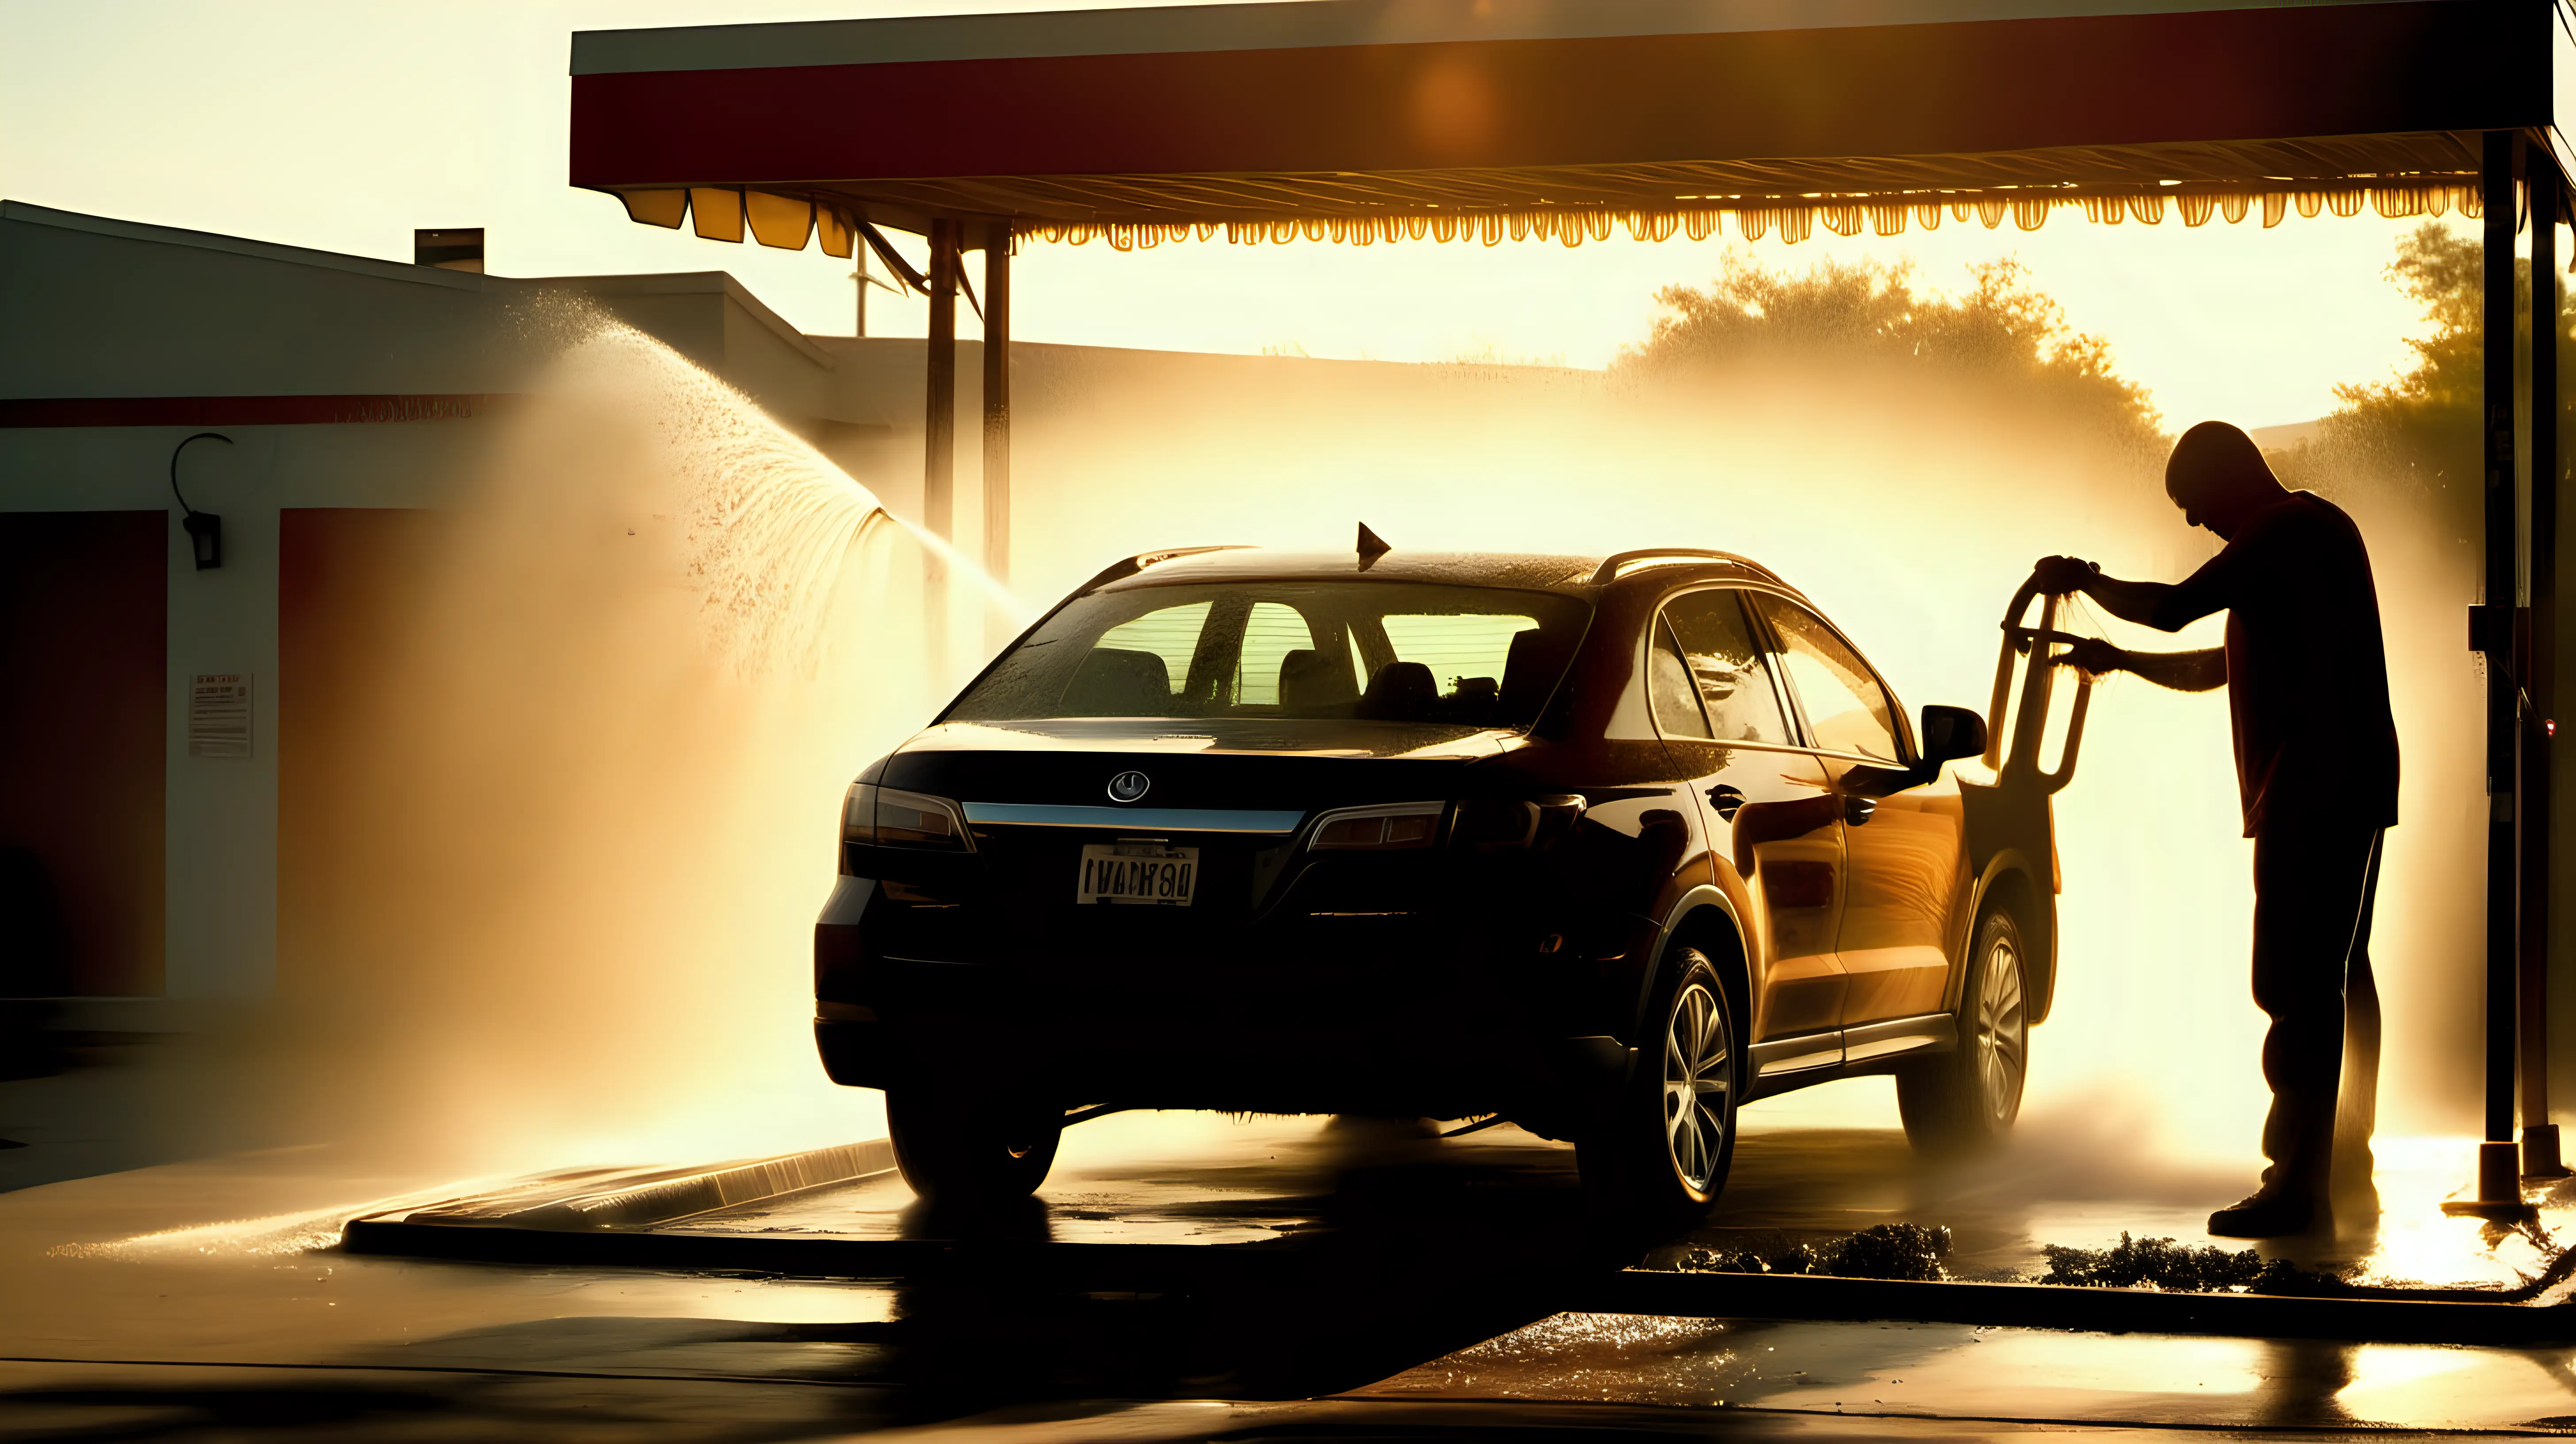 Outdoor Car Wash Bathed in Sunlight